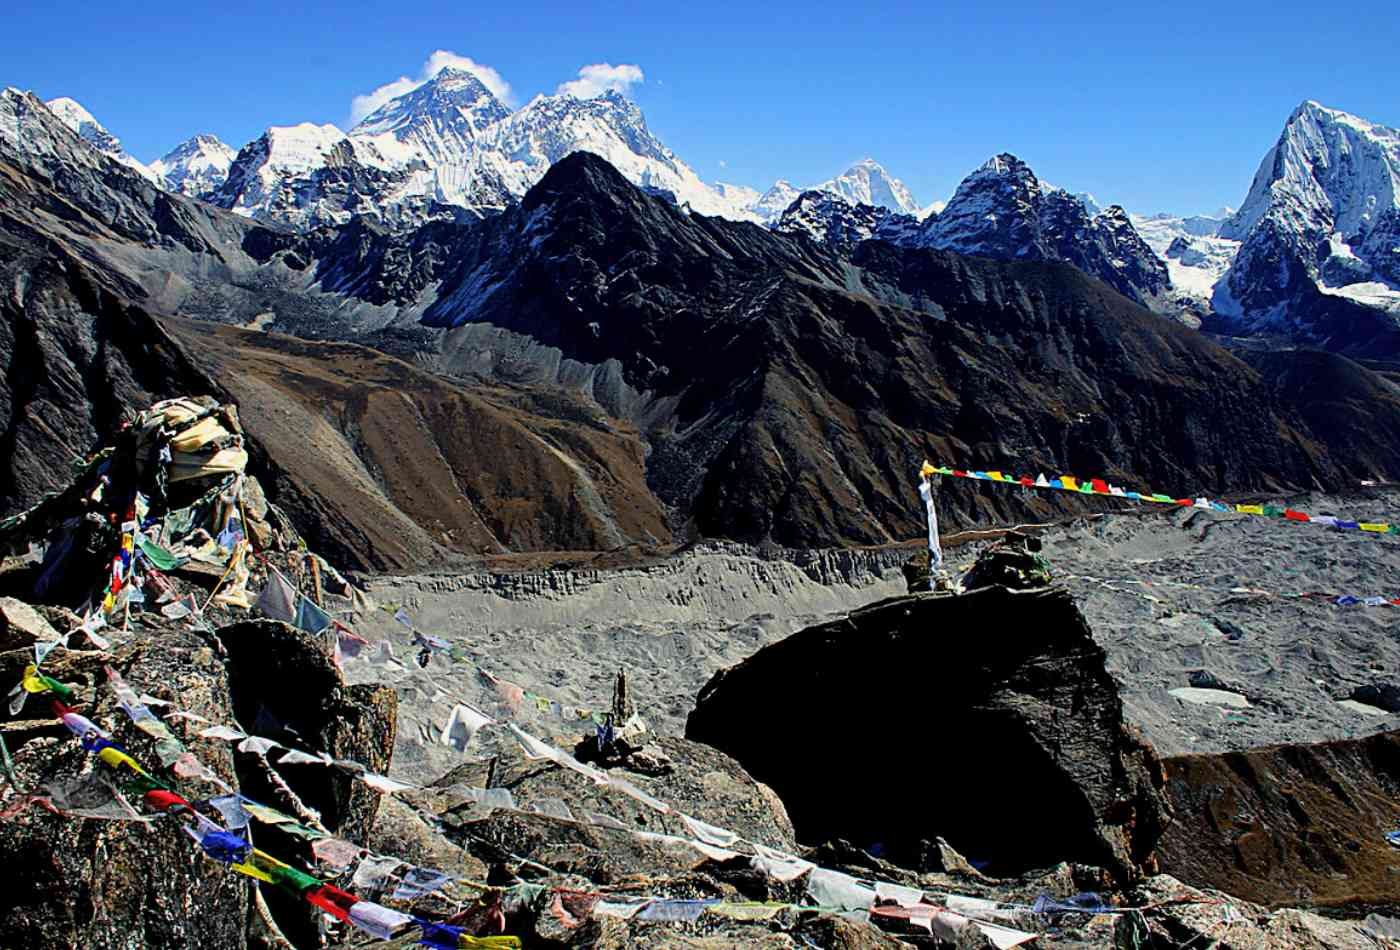  A breathtaking view of Mount Everest from Gokyo-Ri, with prayer flags in the foreground and the mountain surrounded by other majestic peaks.